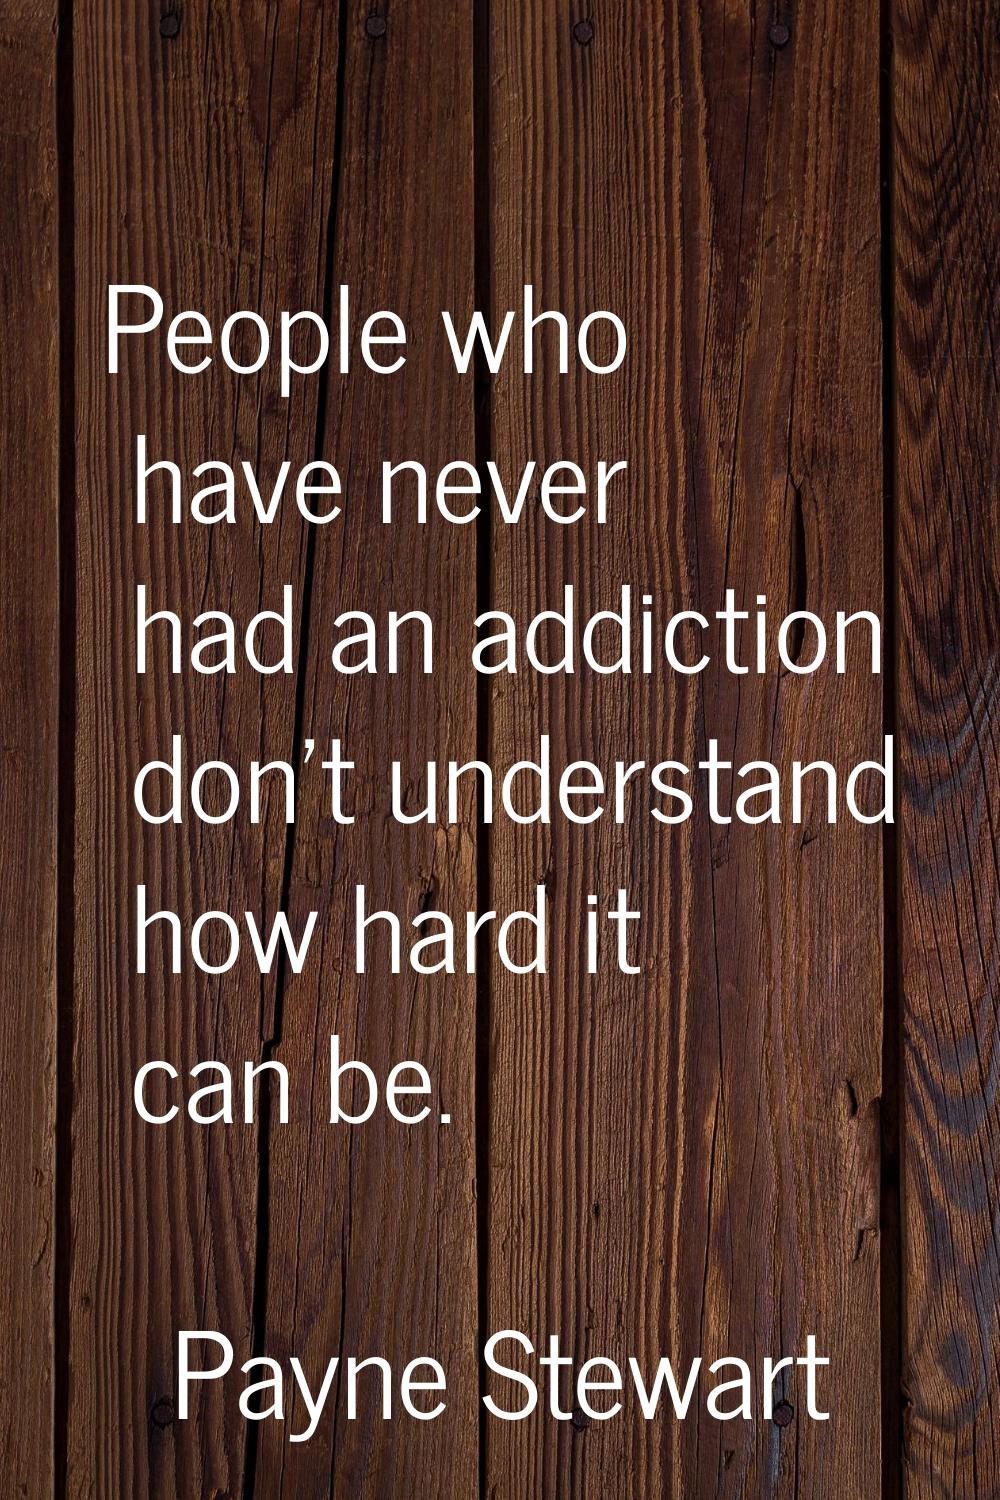 People who have never had an addiction don't understand how hard it can be.